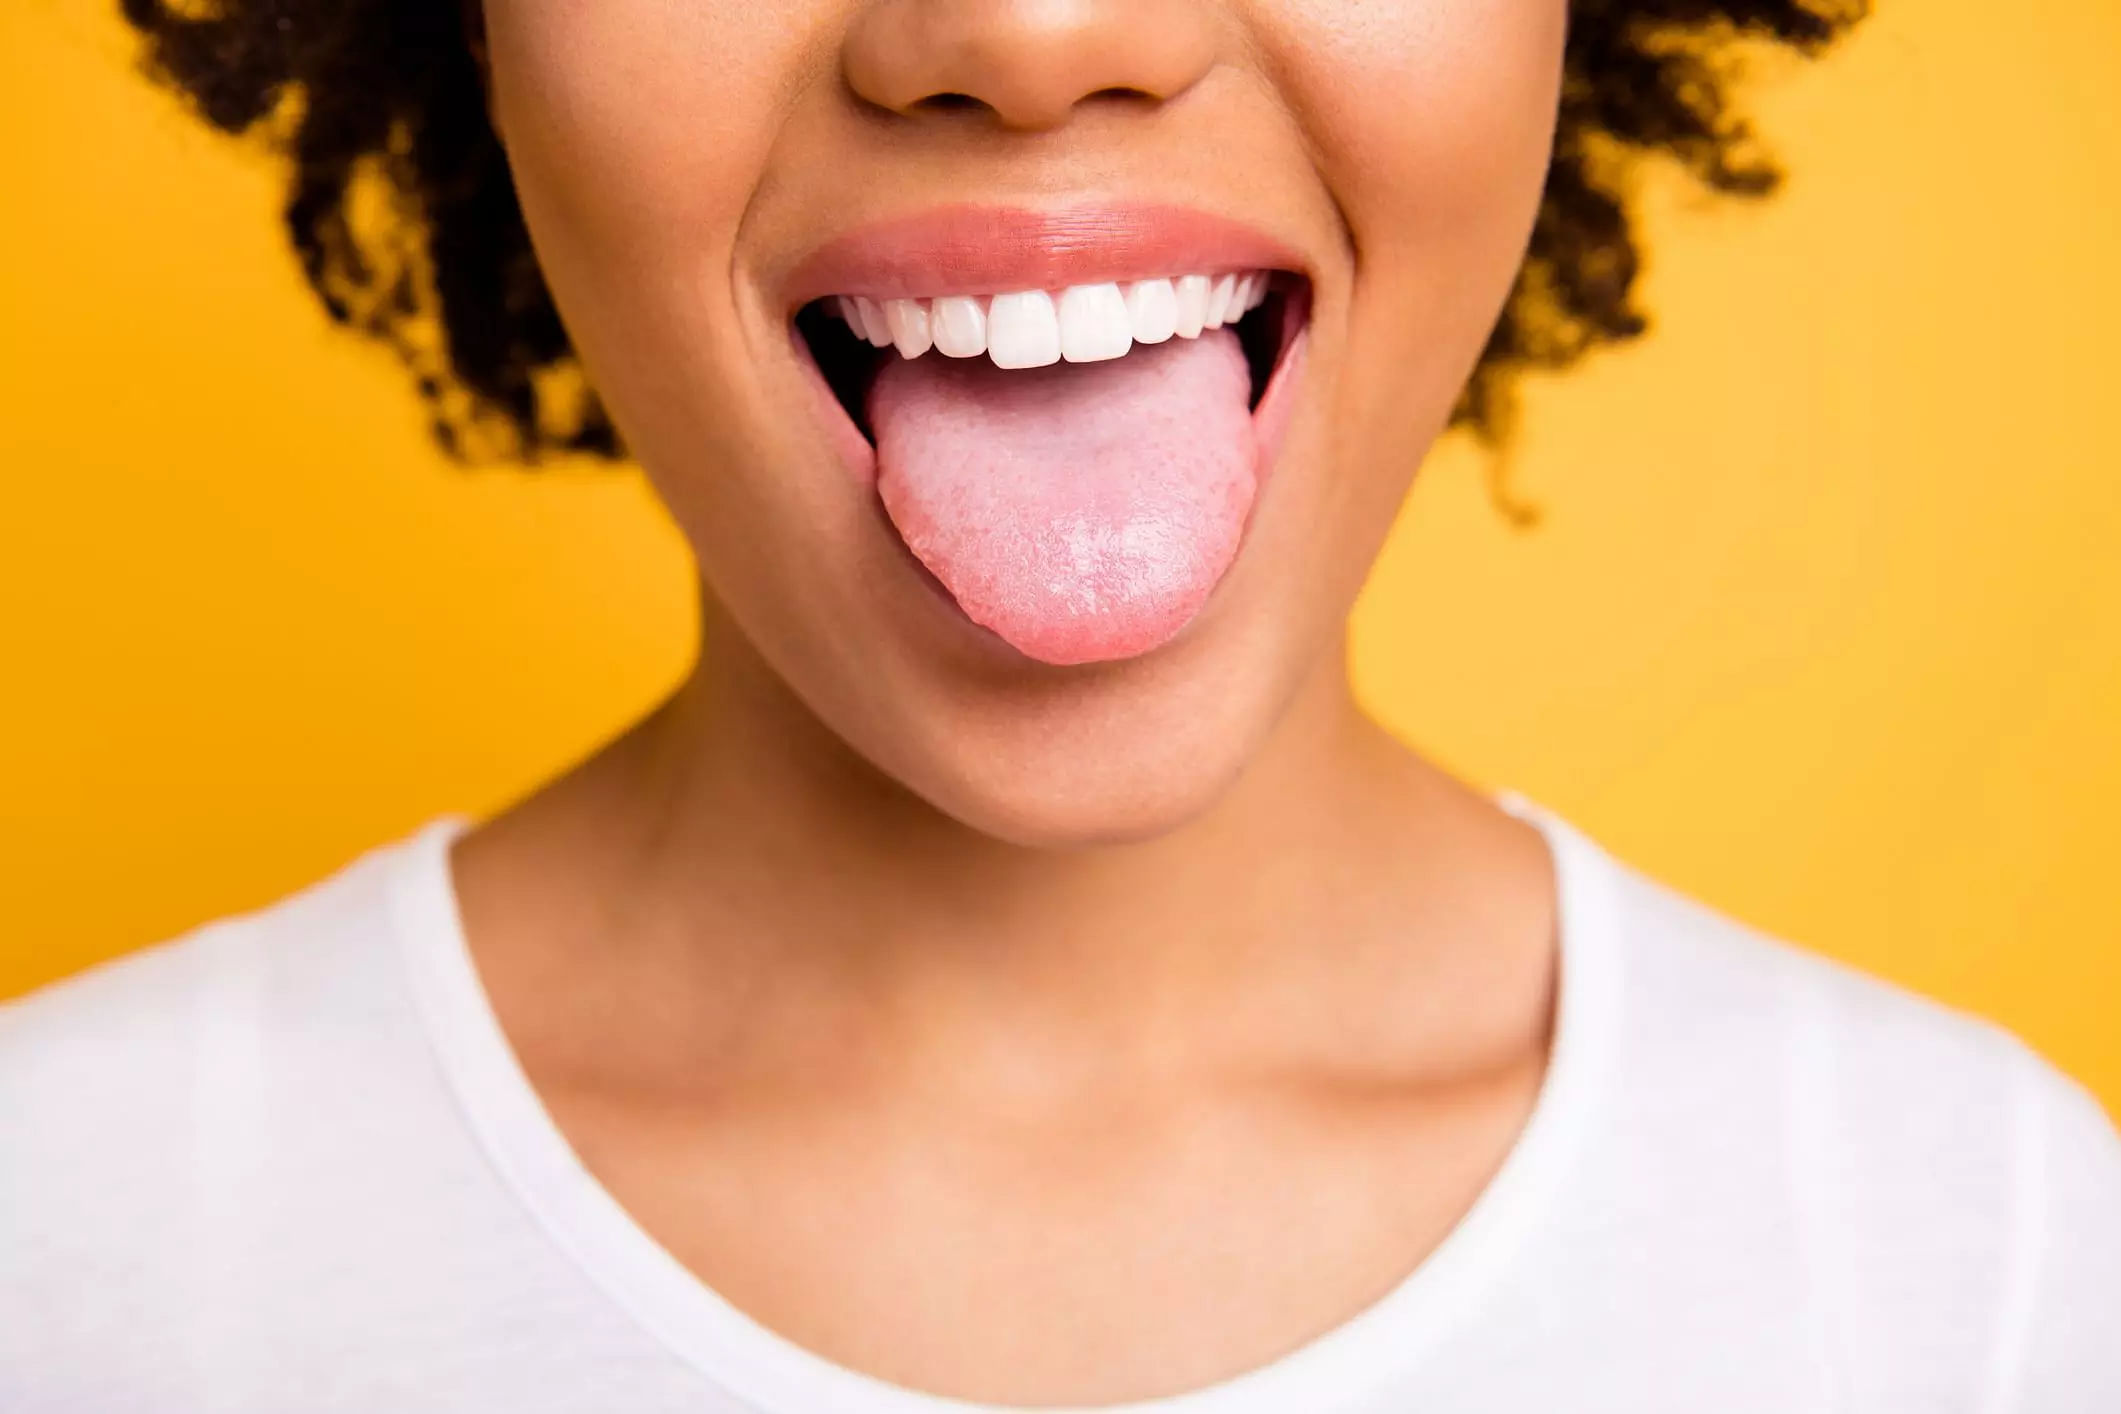 Tongue Troubles to Look Out For